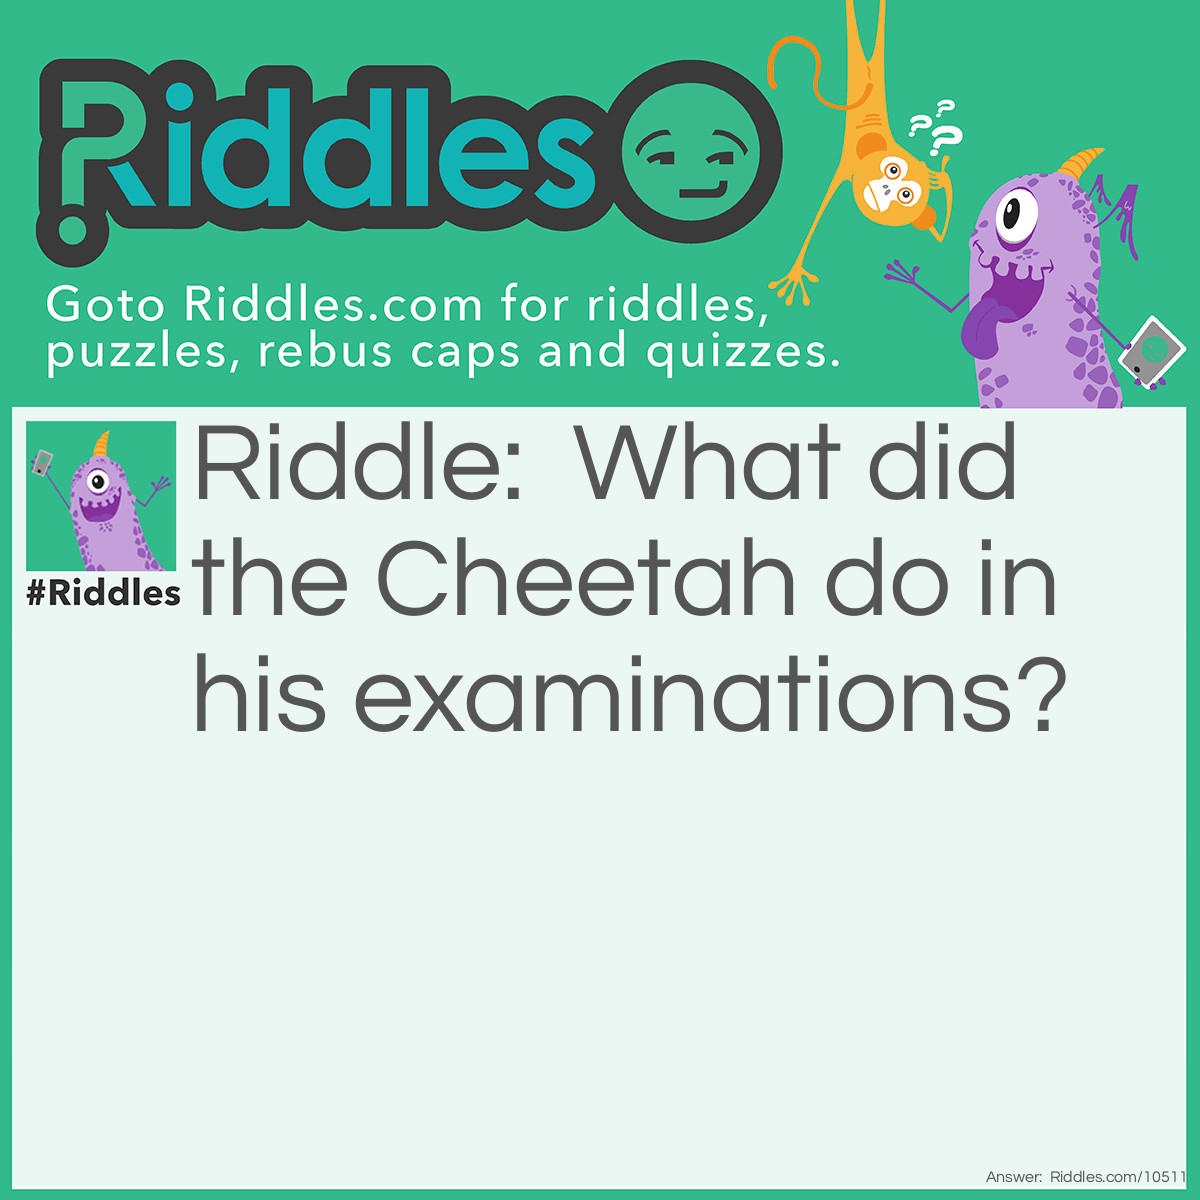 Riddle: What did the Cheetah do in his examinations? Answer: He cheated!